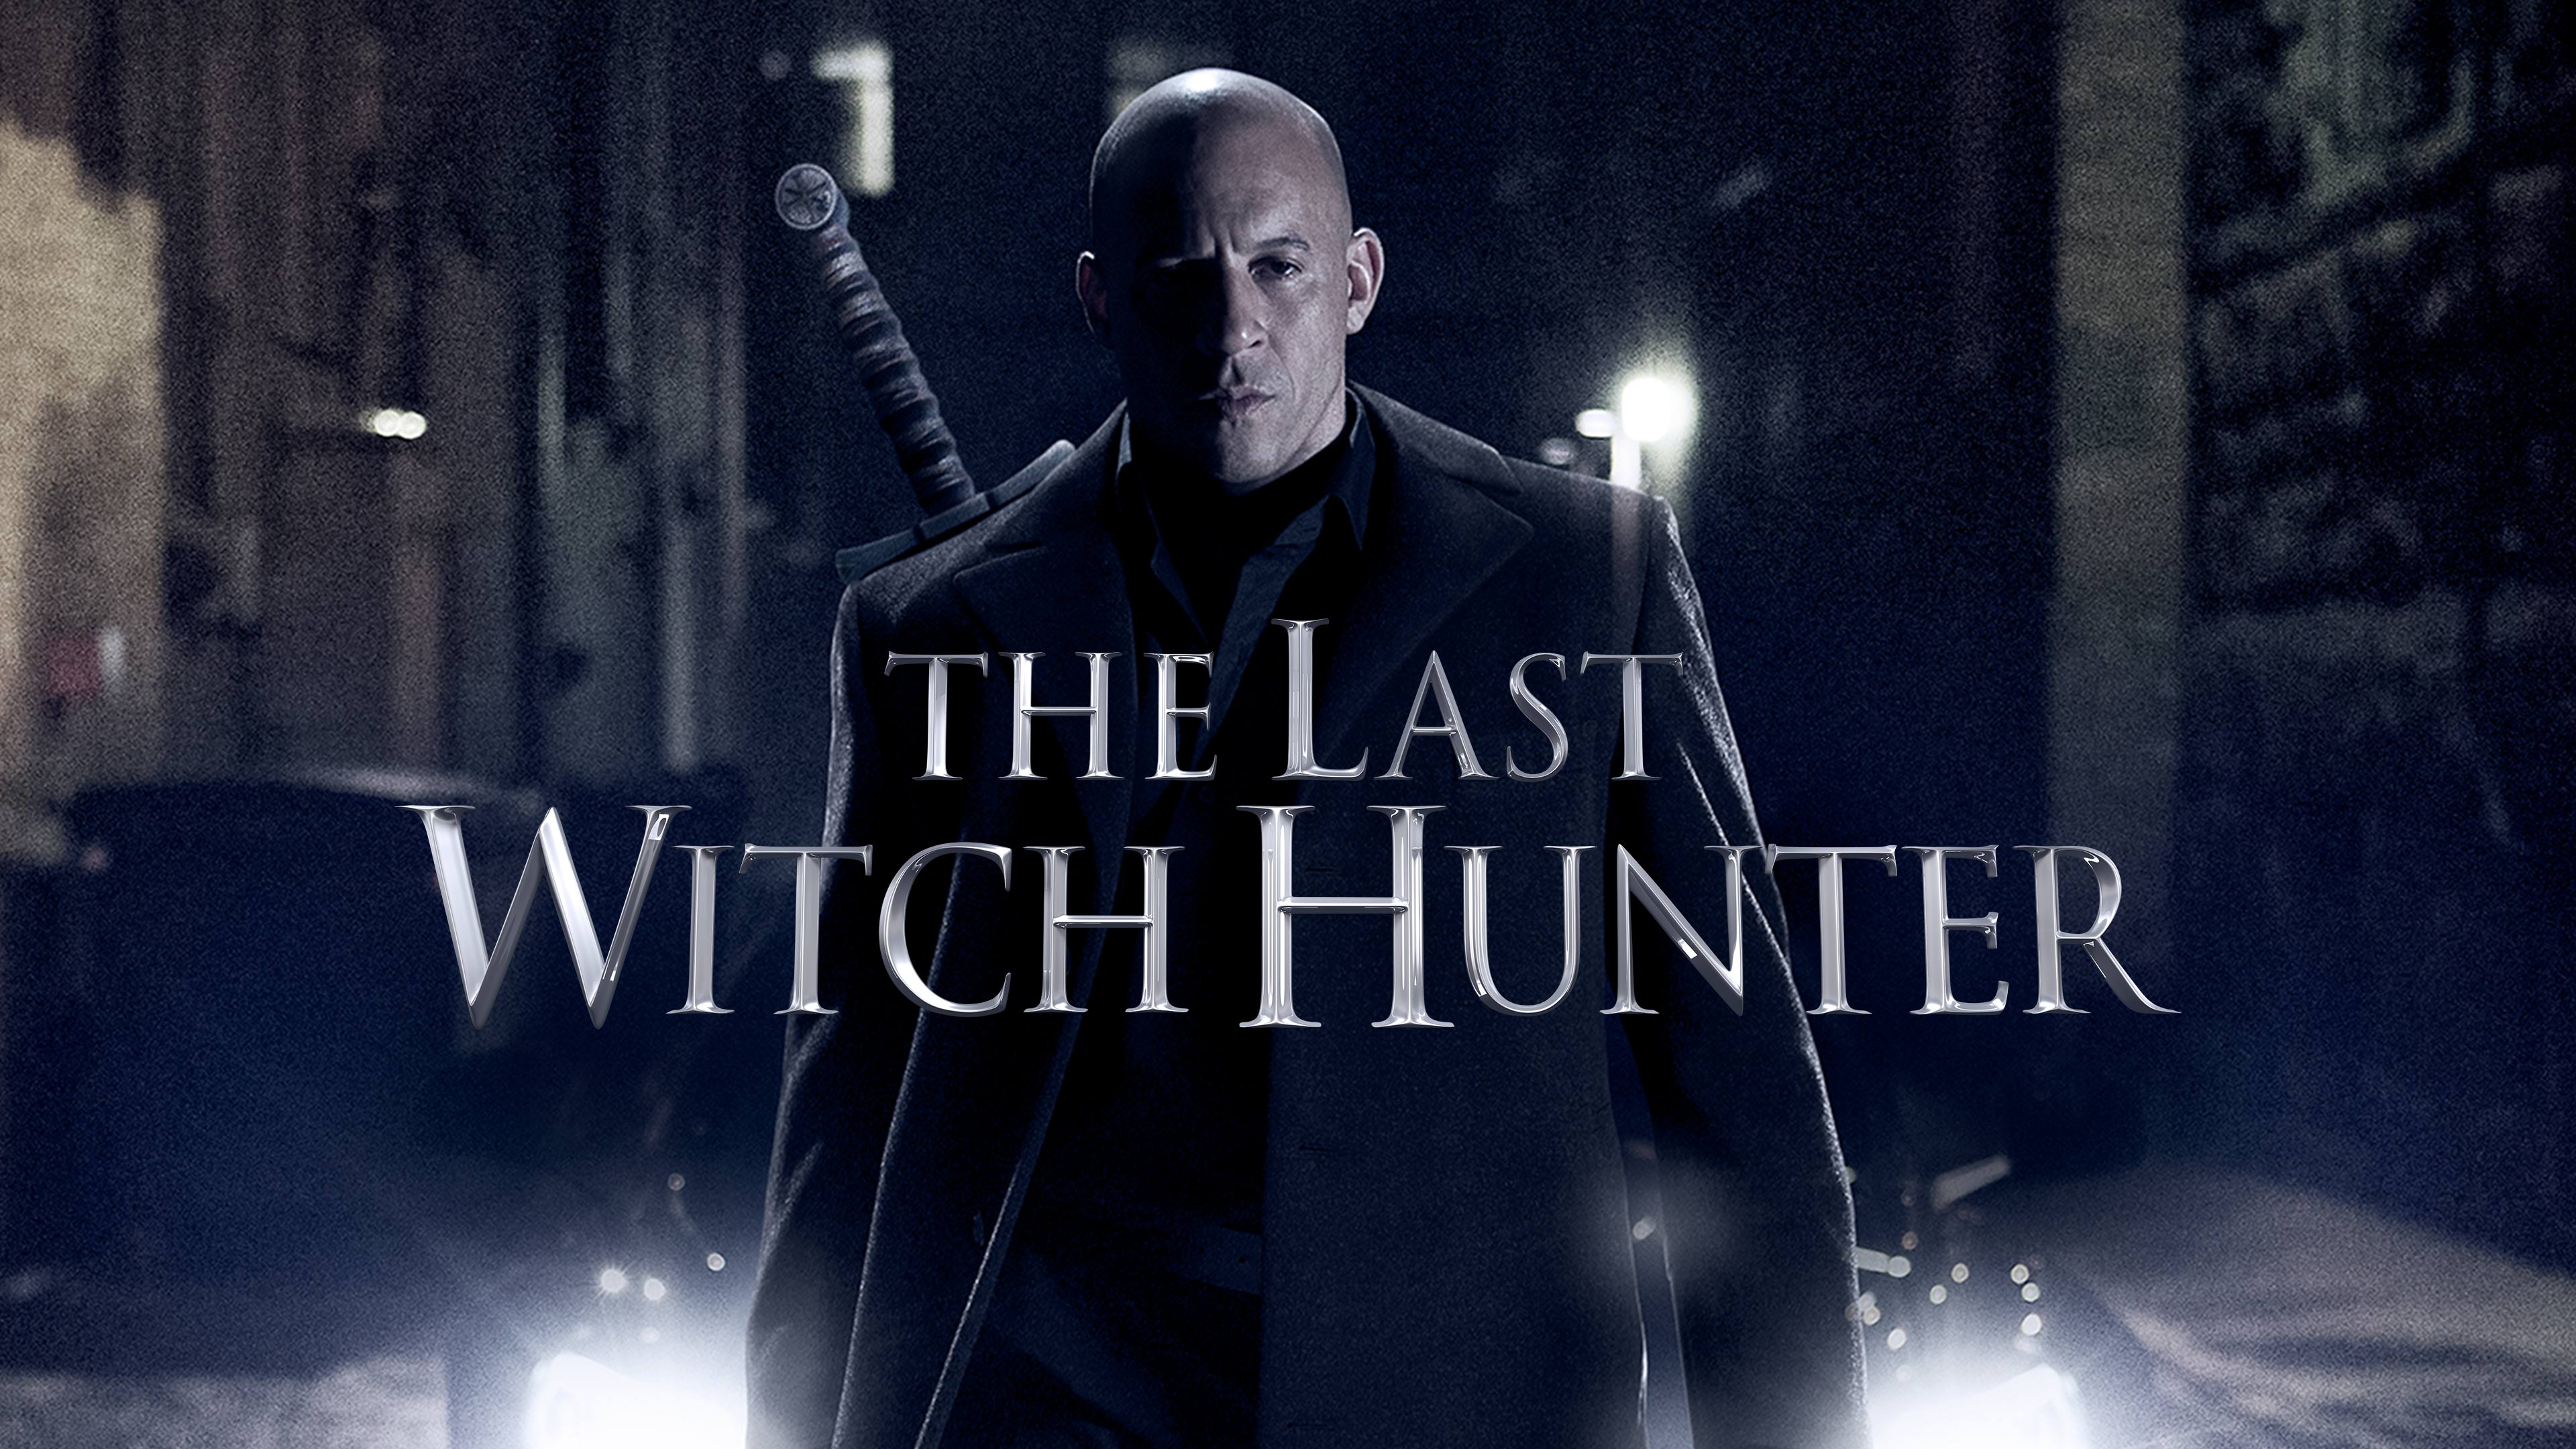 Watch The Last Witch Hunter Online | Stream Full Movies